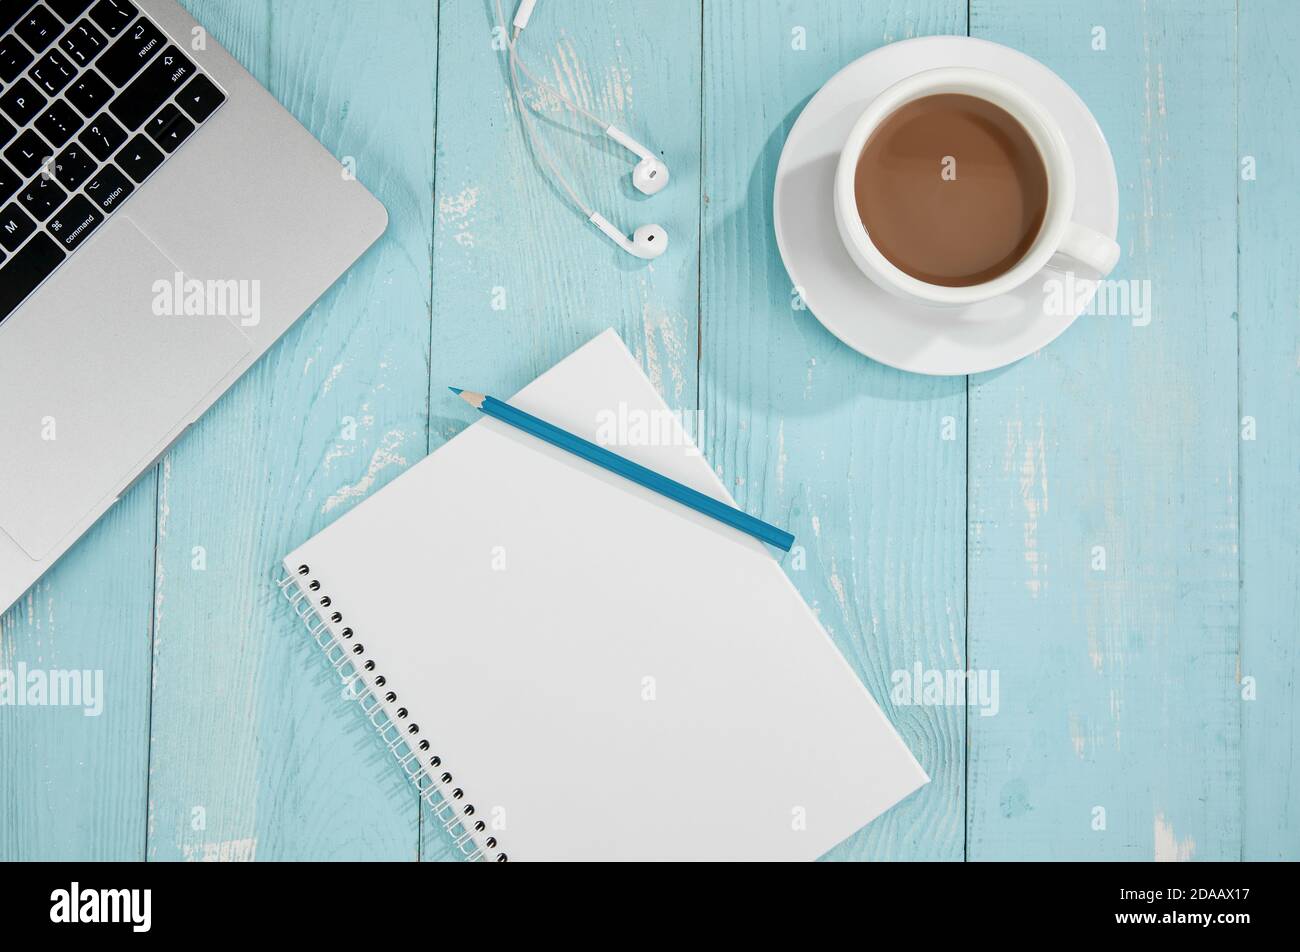 Top view of a cup of coffee, drawing notebook, laptop, and handsfree on a blue wooden surface Stock Photo